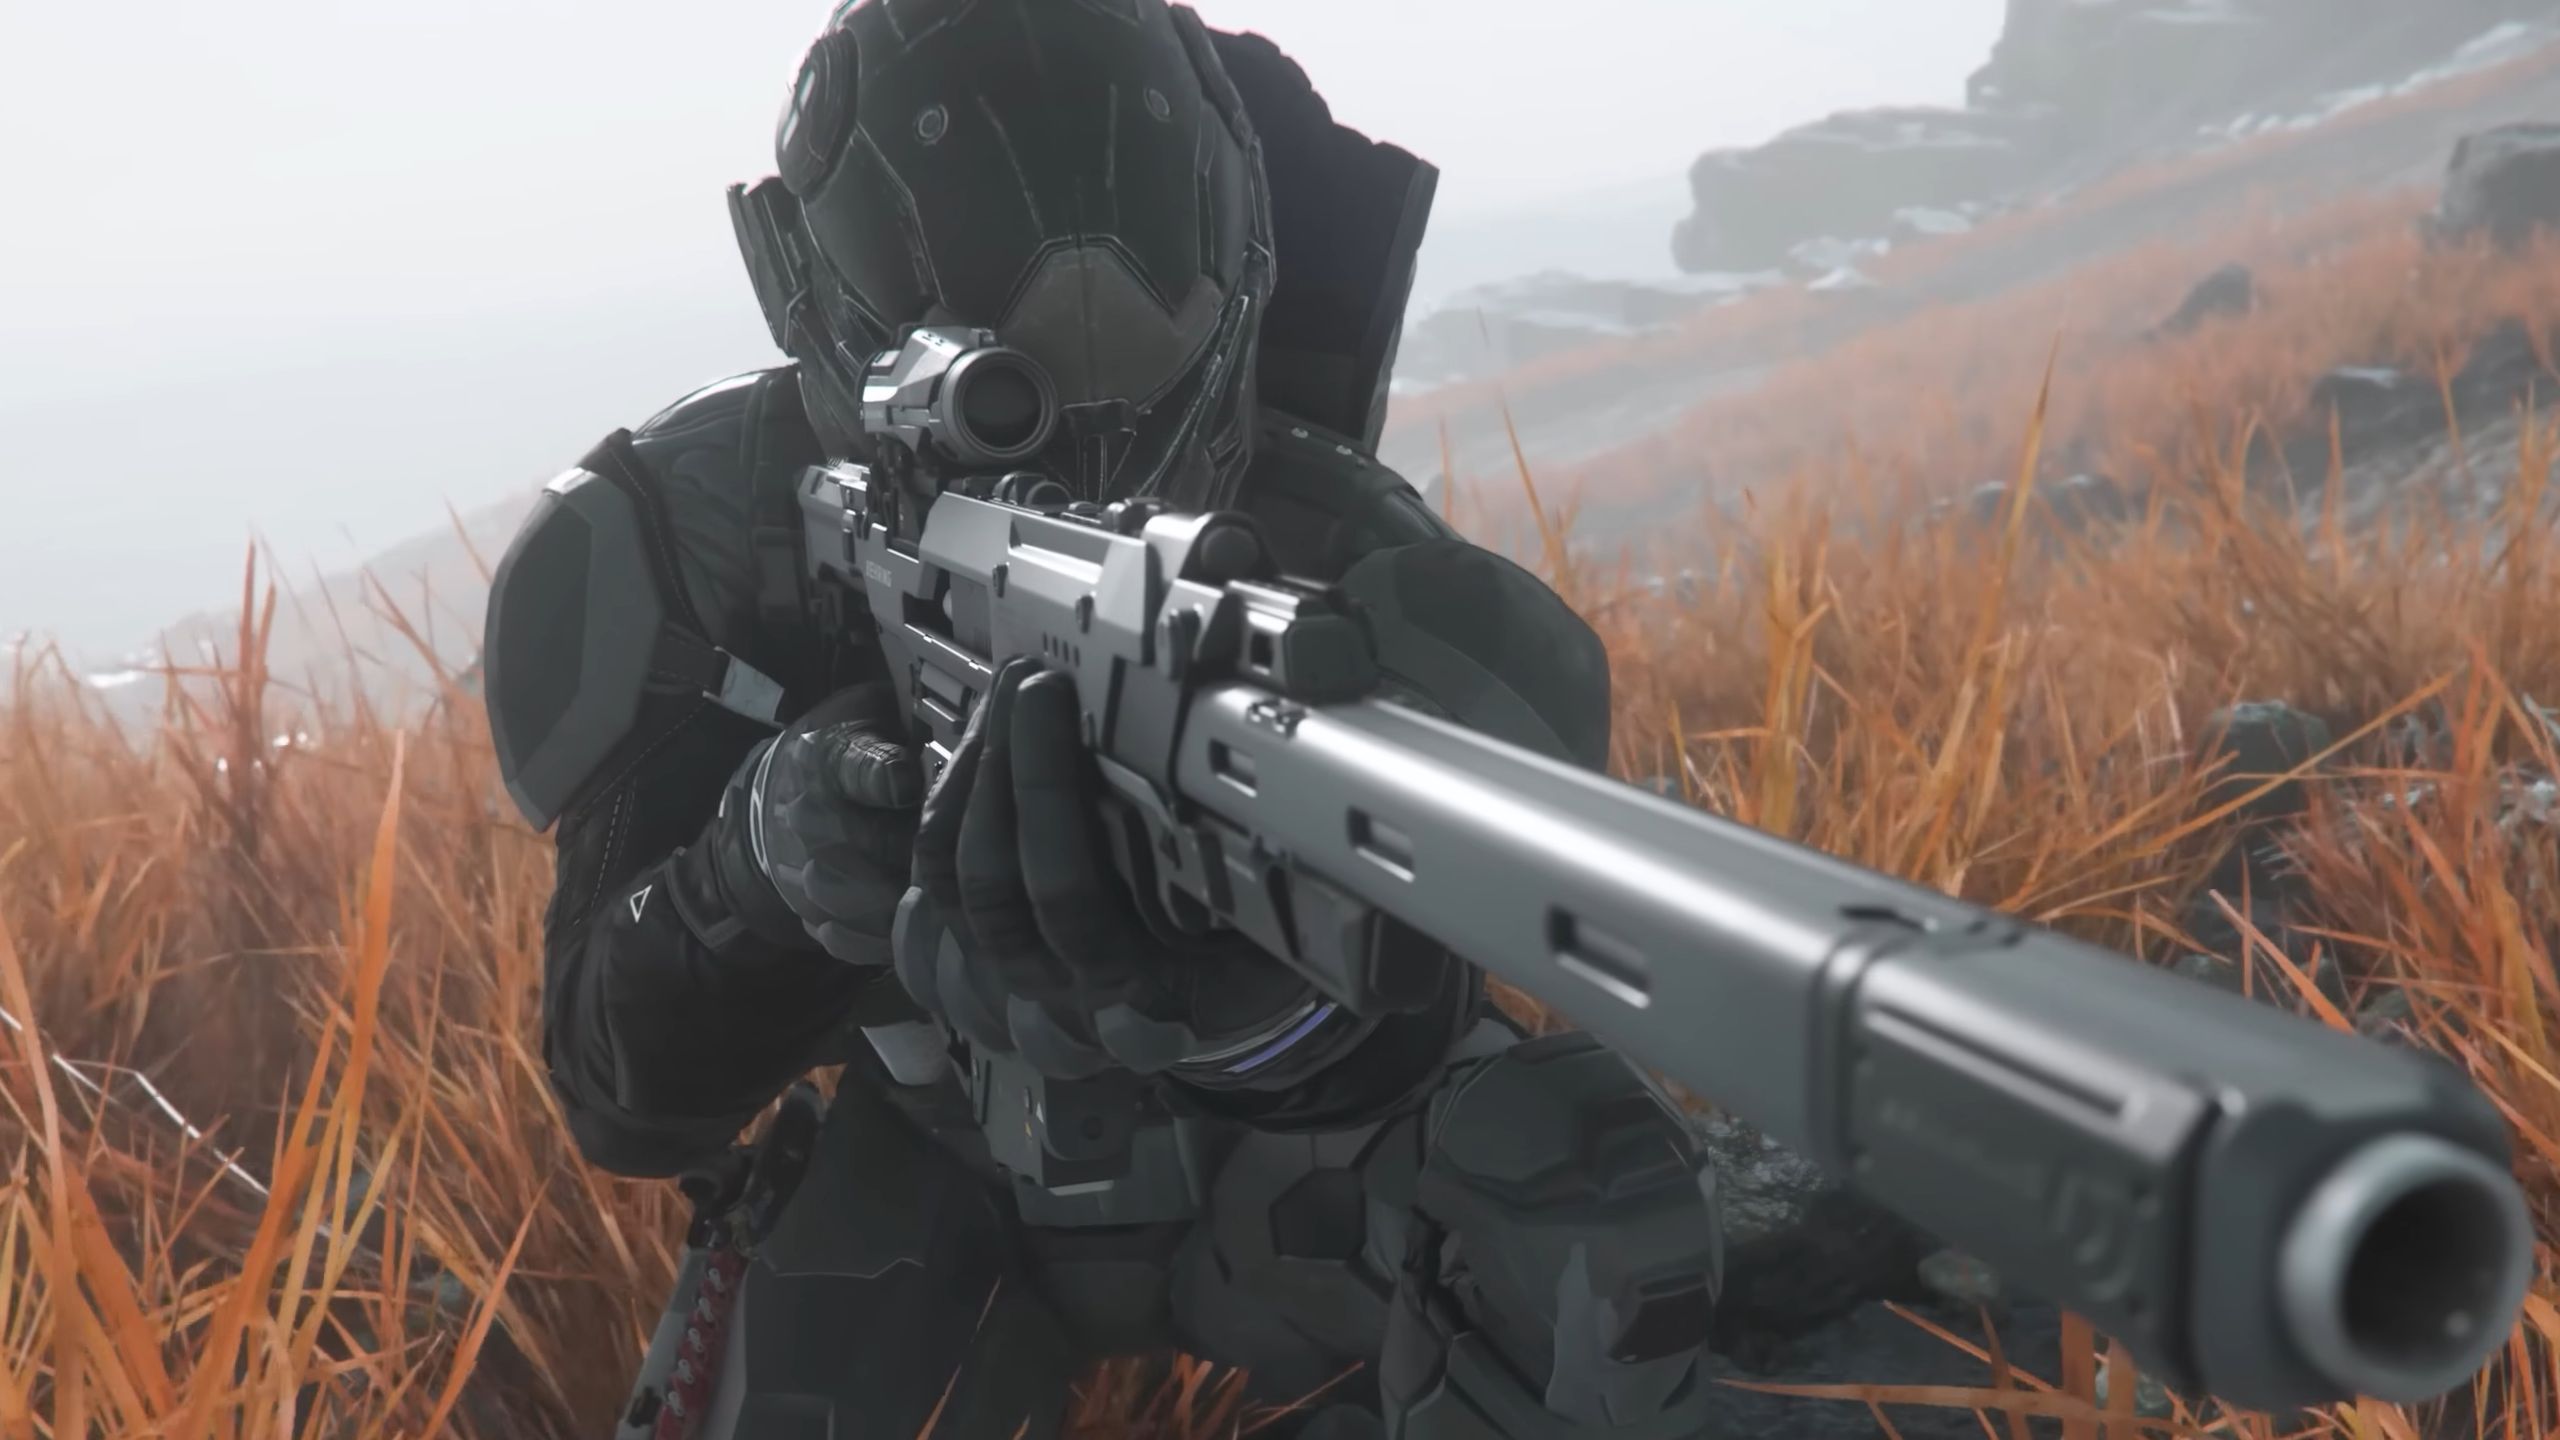  Star Citizen's first-person shooting is getting backpack-reloading, dynamic crosshairs, procedural recoil, and other improvements to 'bring the FPS combat to AAA standard' 